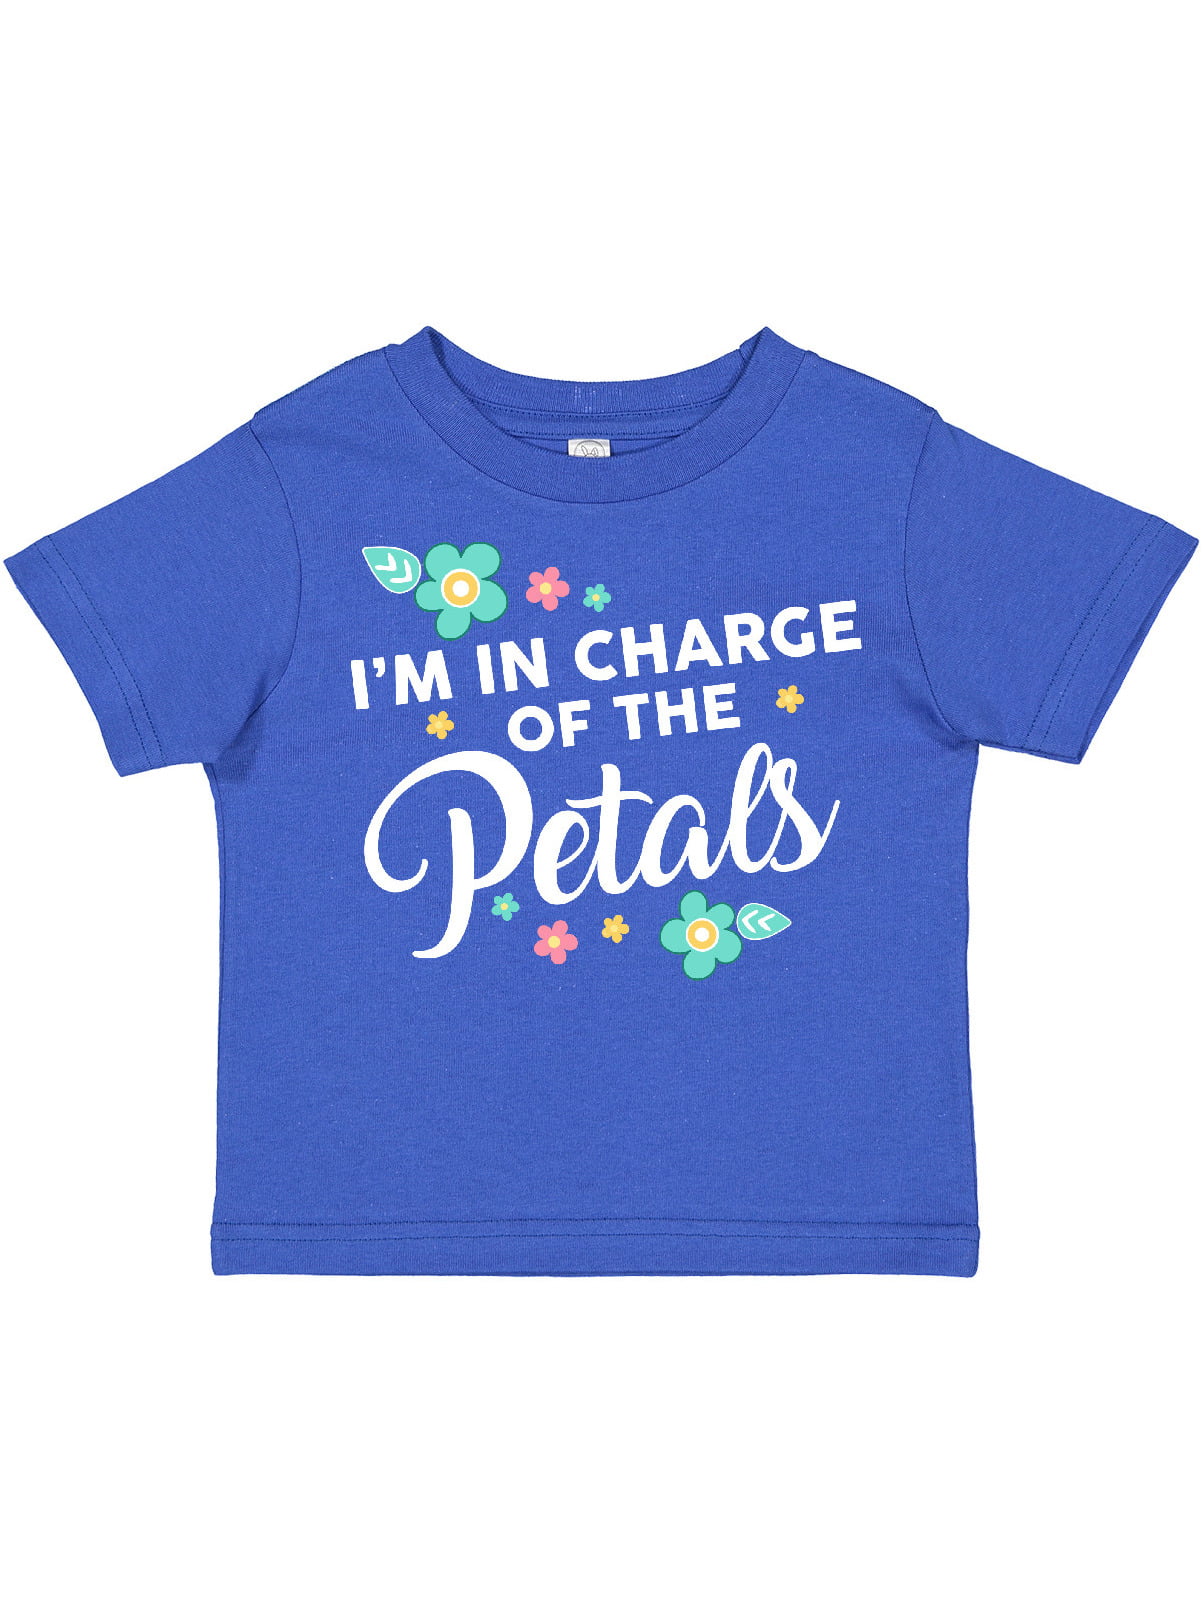 inktastic Flower Girl with Bouquet Toddler T-Shirt